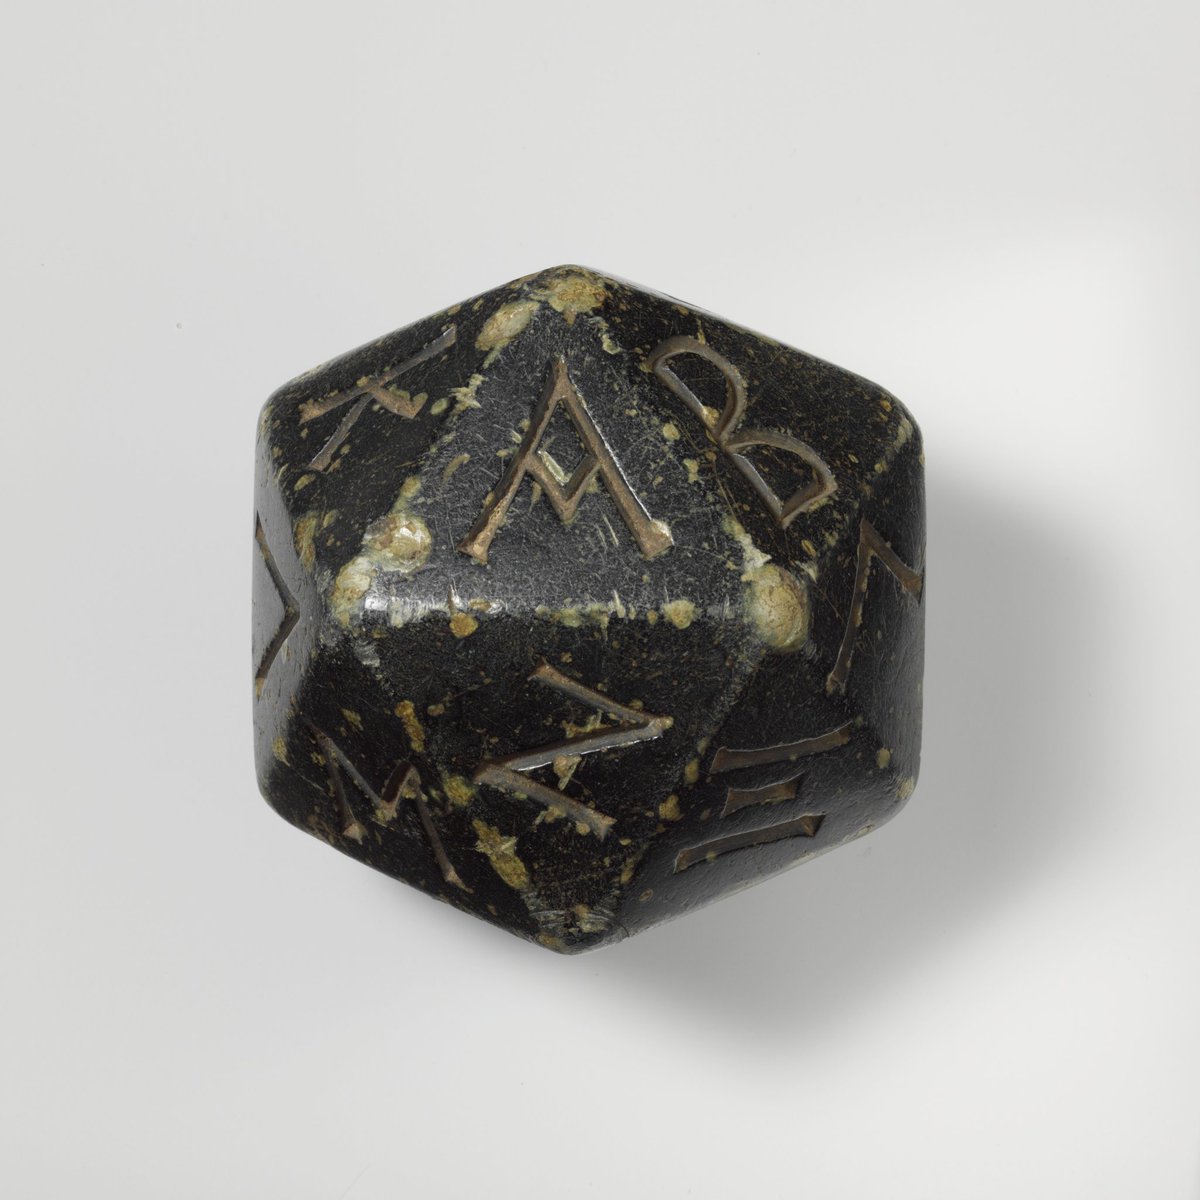 Given the popularity of the fantastic #baldursgate, here's a D20 from 2,200 years ago! This greenstone die is inscribed with the Greek alphabet, from alpha to upsilon. Whilst its purpose is unknown, it may relate to board games or religious divination. 🏛️@metmuseum #History